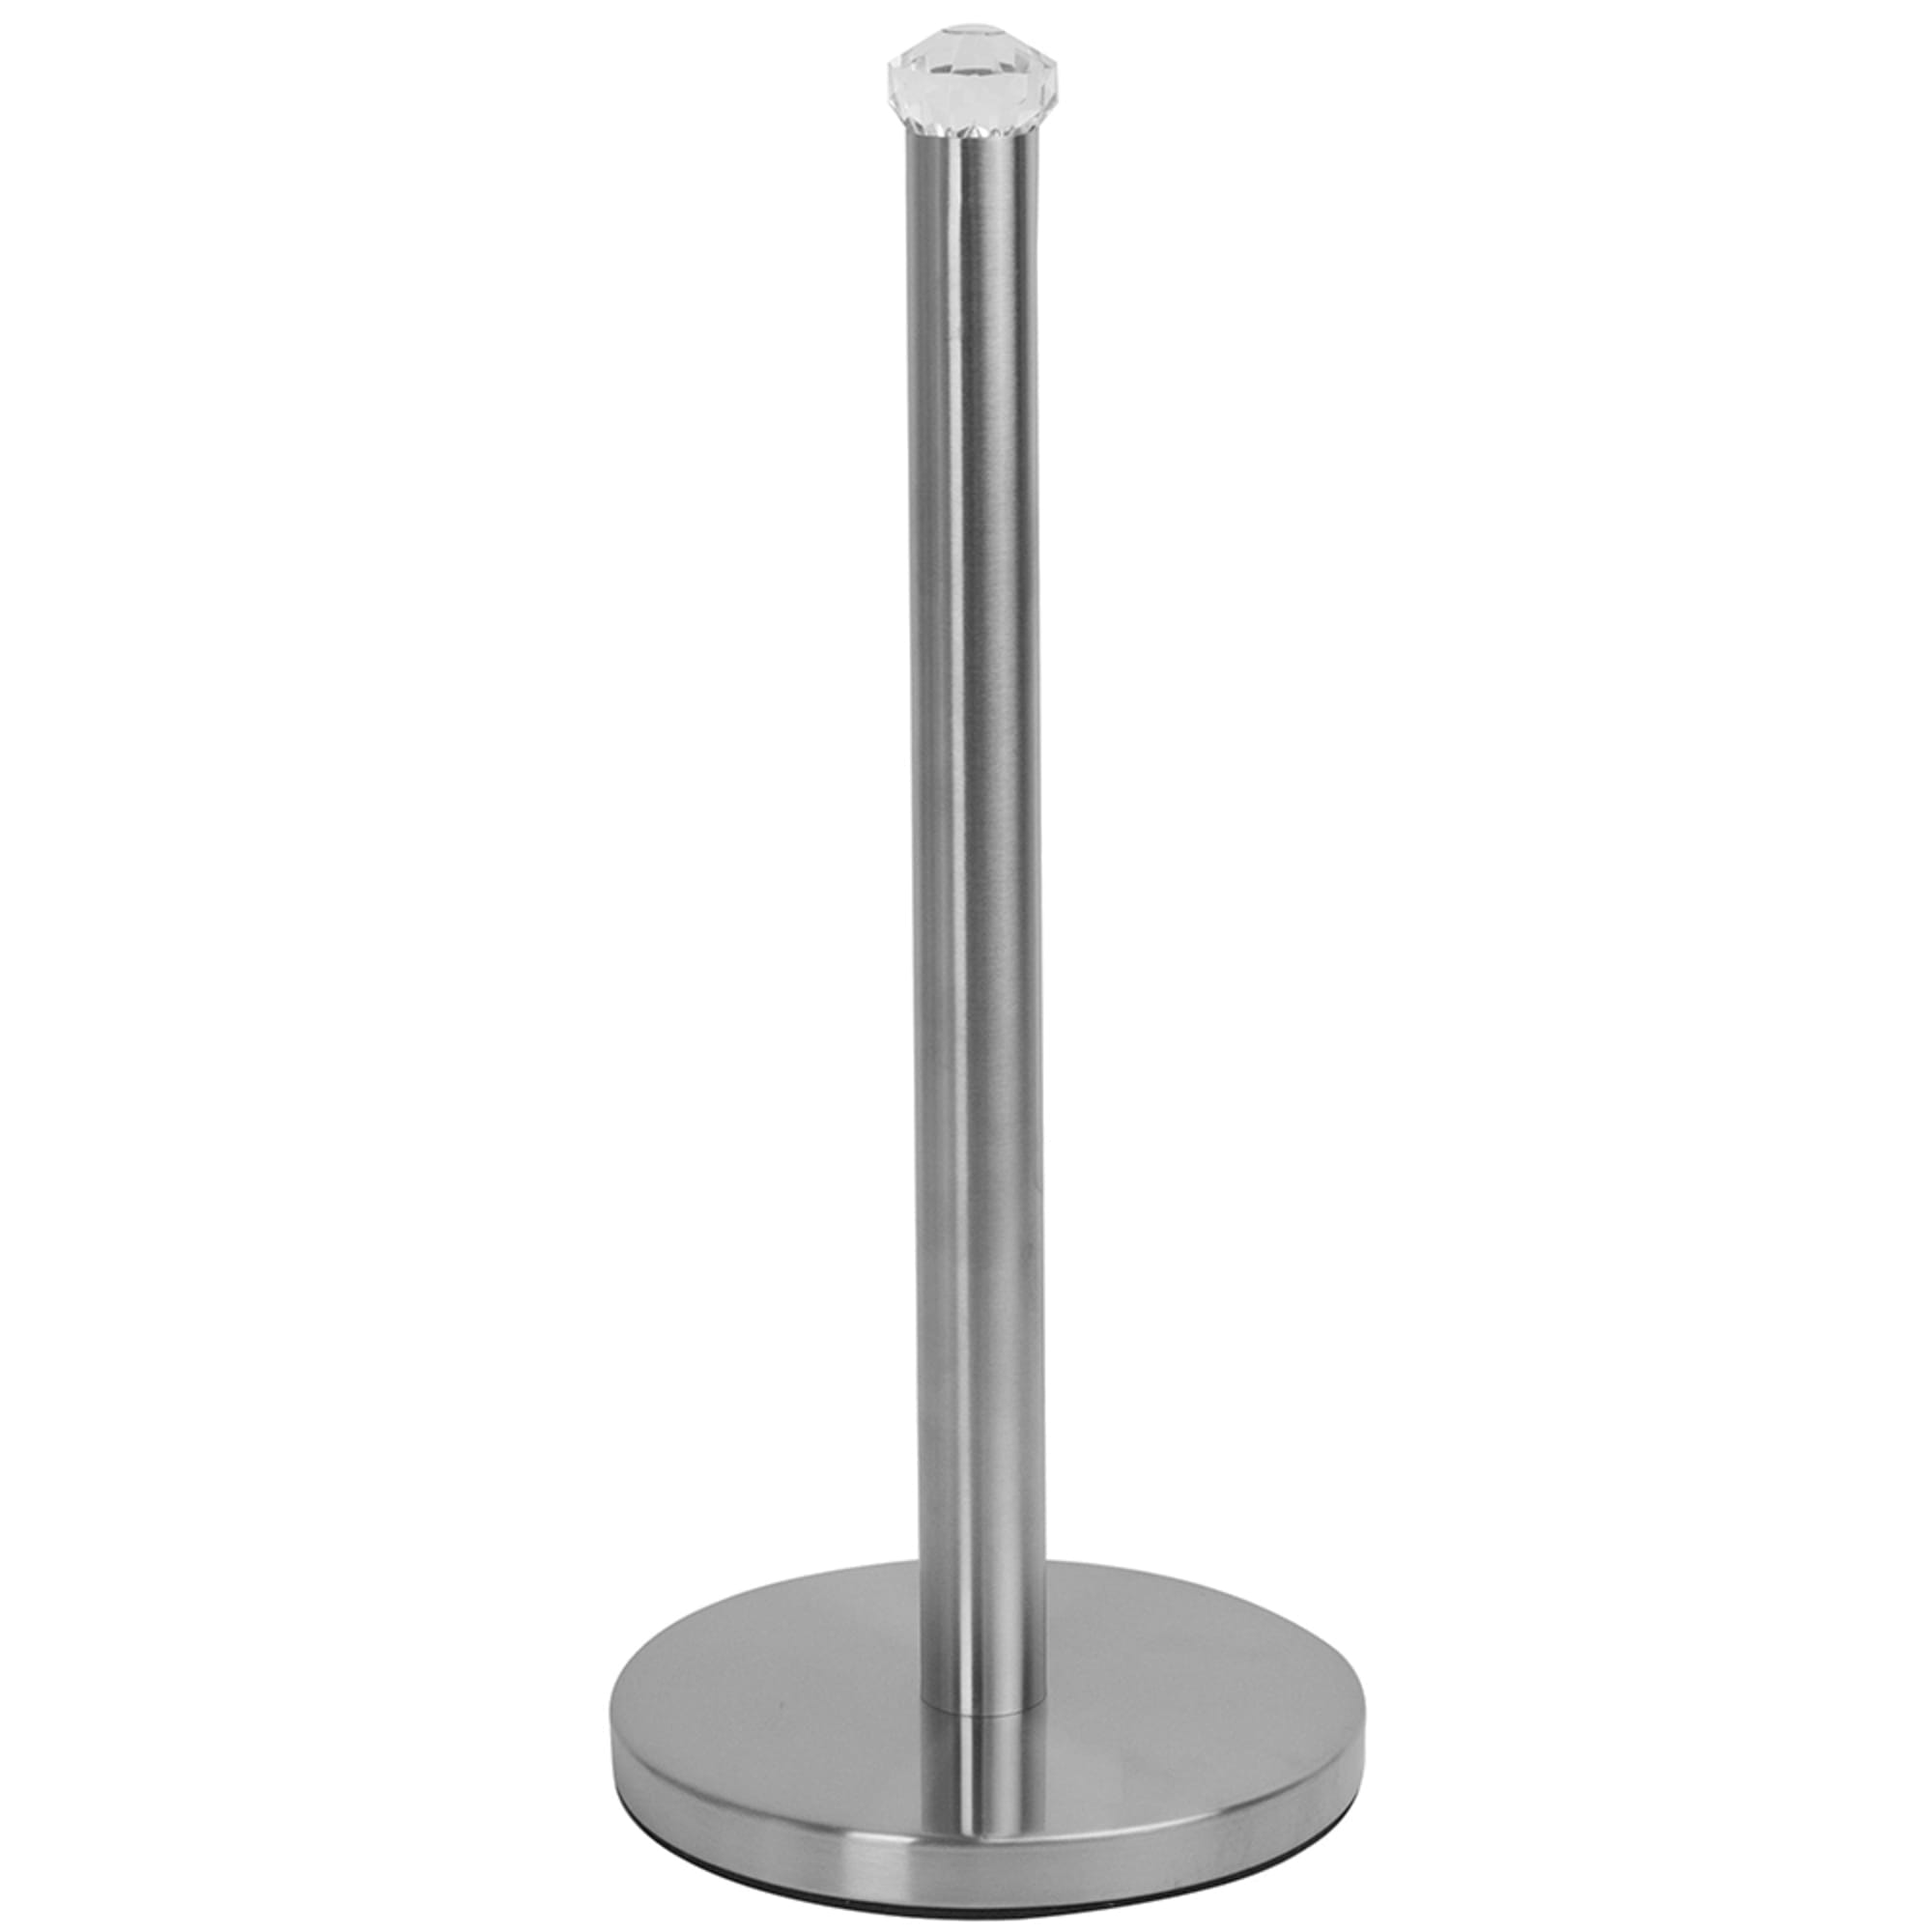 Home Basics Freestanding Paper Towel Holder with Faux Crystal Top, Satin Nickel $8.00 EACH, CASE PACK OF 6